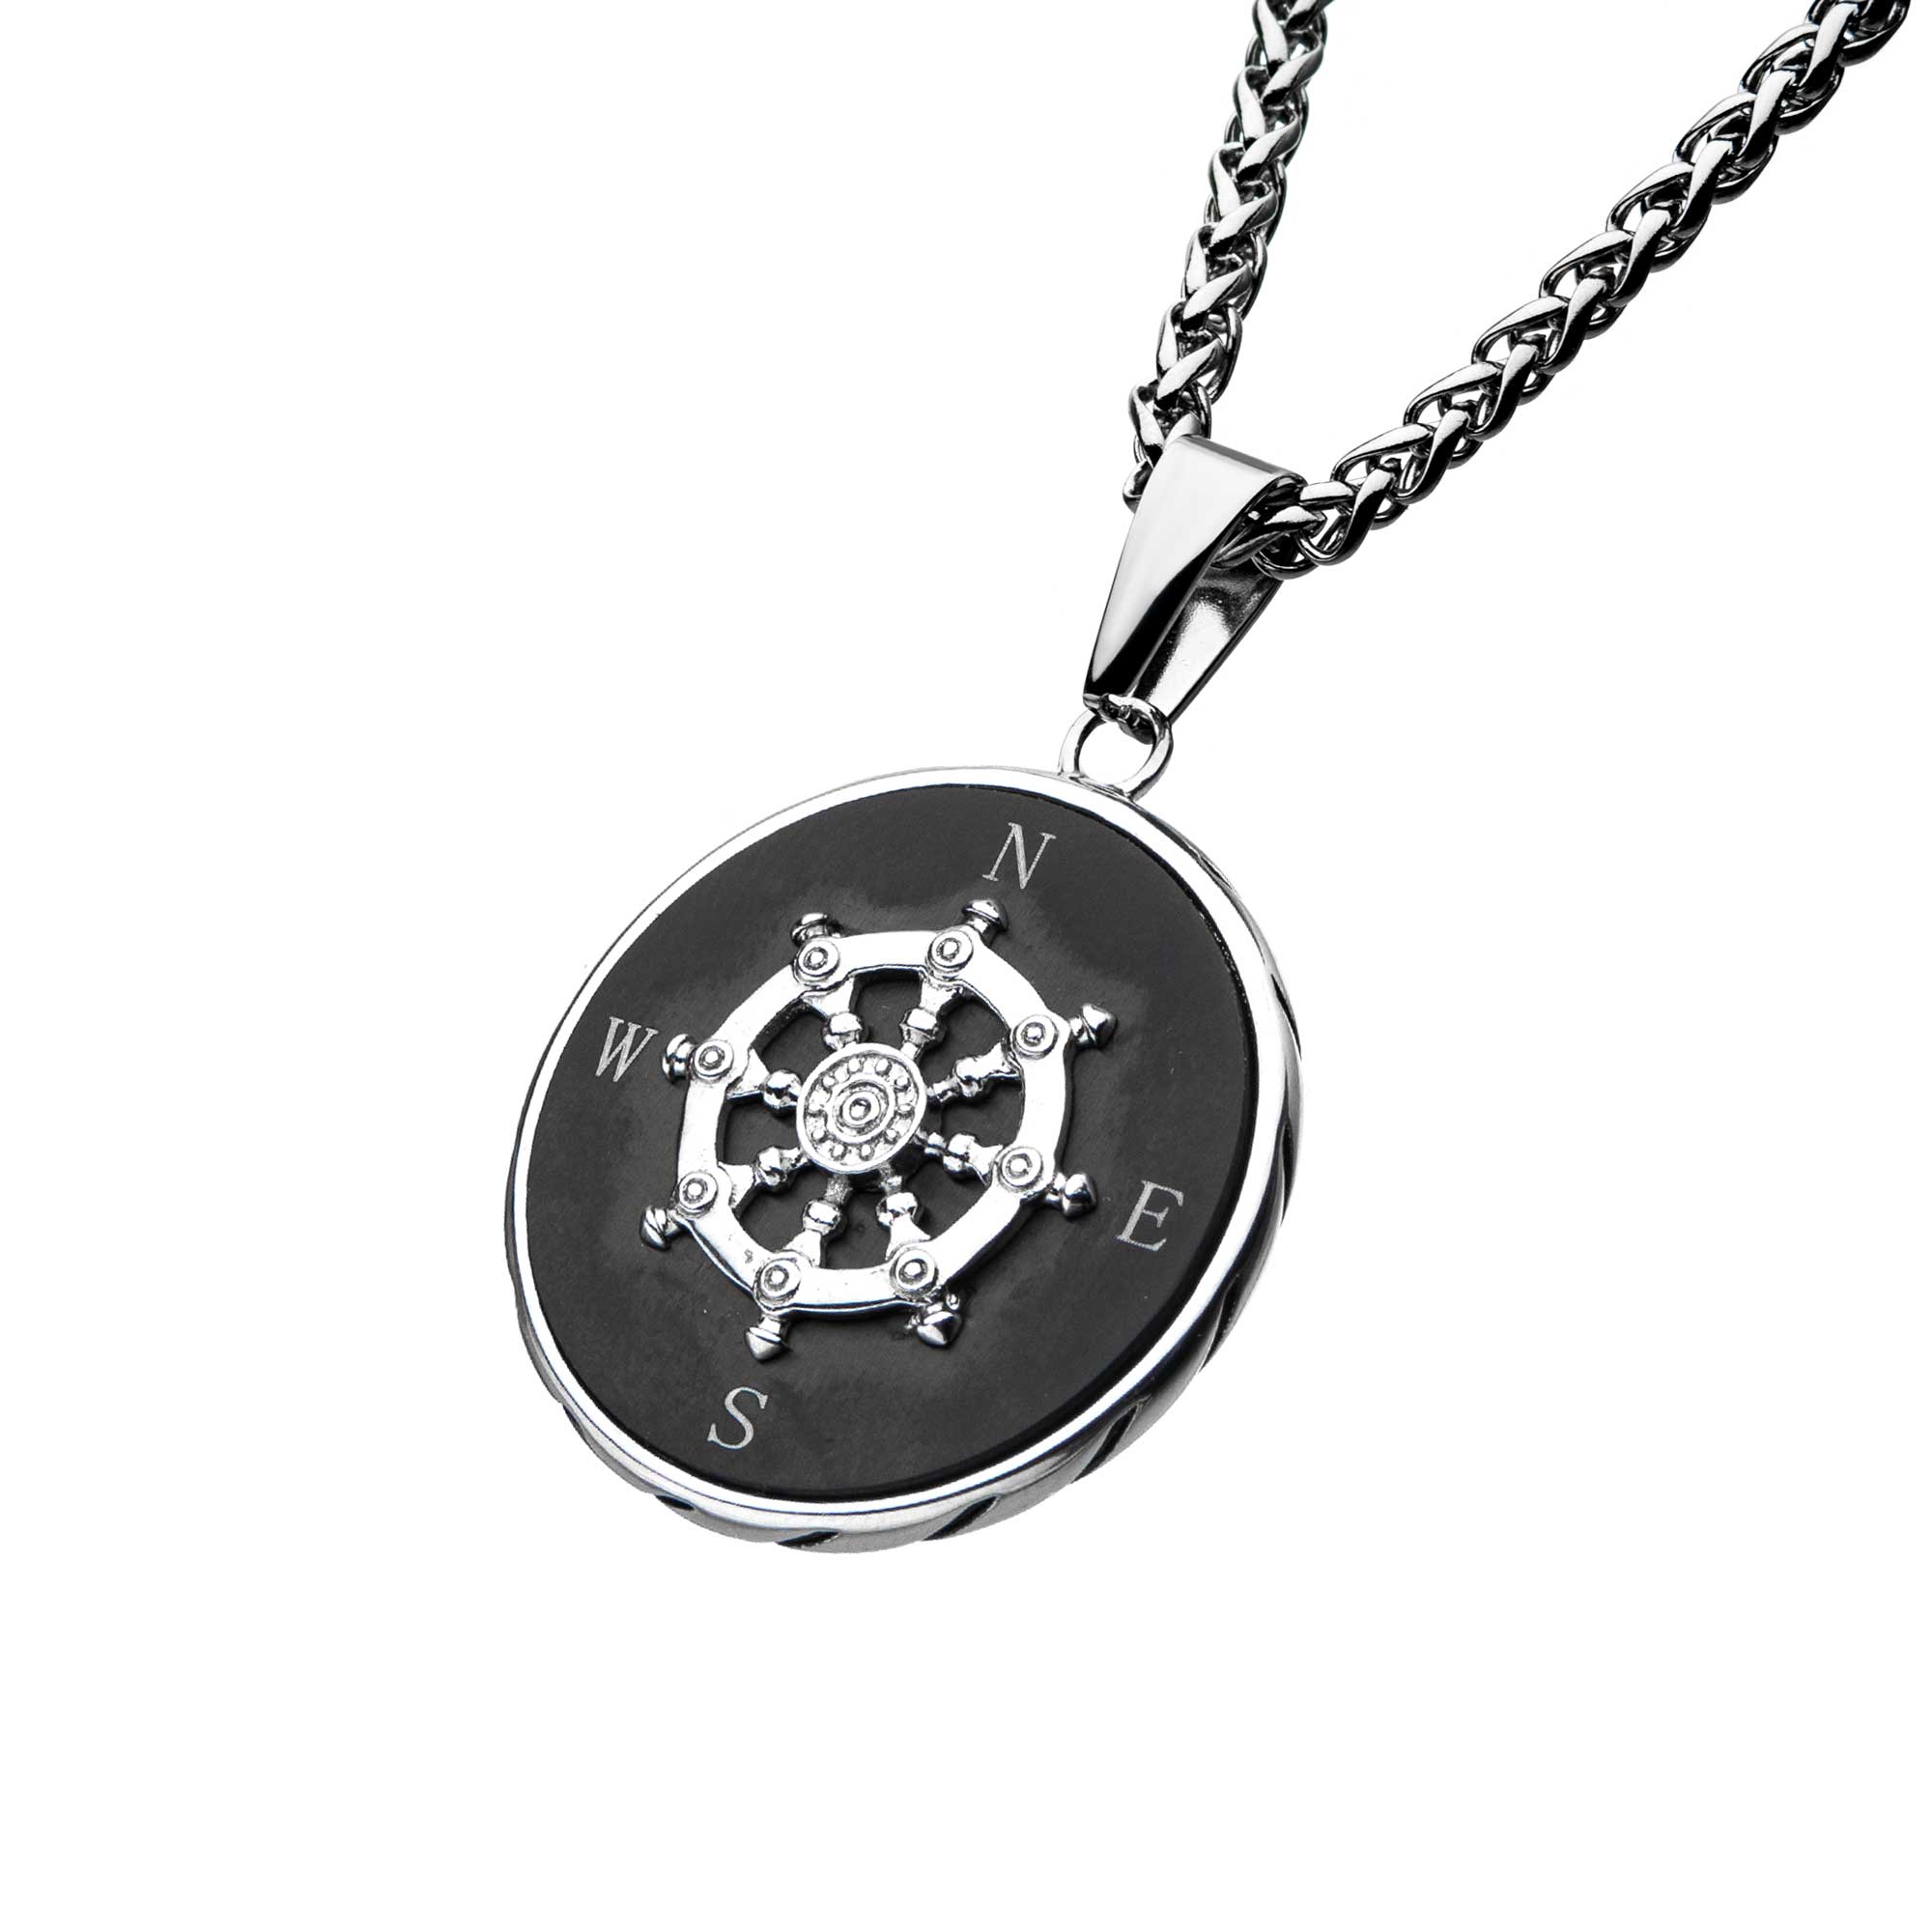 Stainless Steel Black Plated Ship's Wheel Compass Pendant with Chain Image 2 Lewis Jewelers, Inc. Ansonia, CT